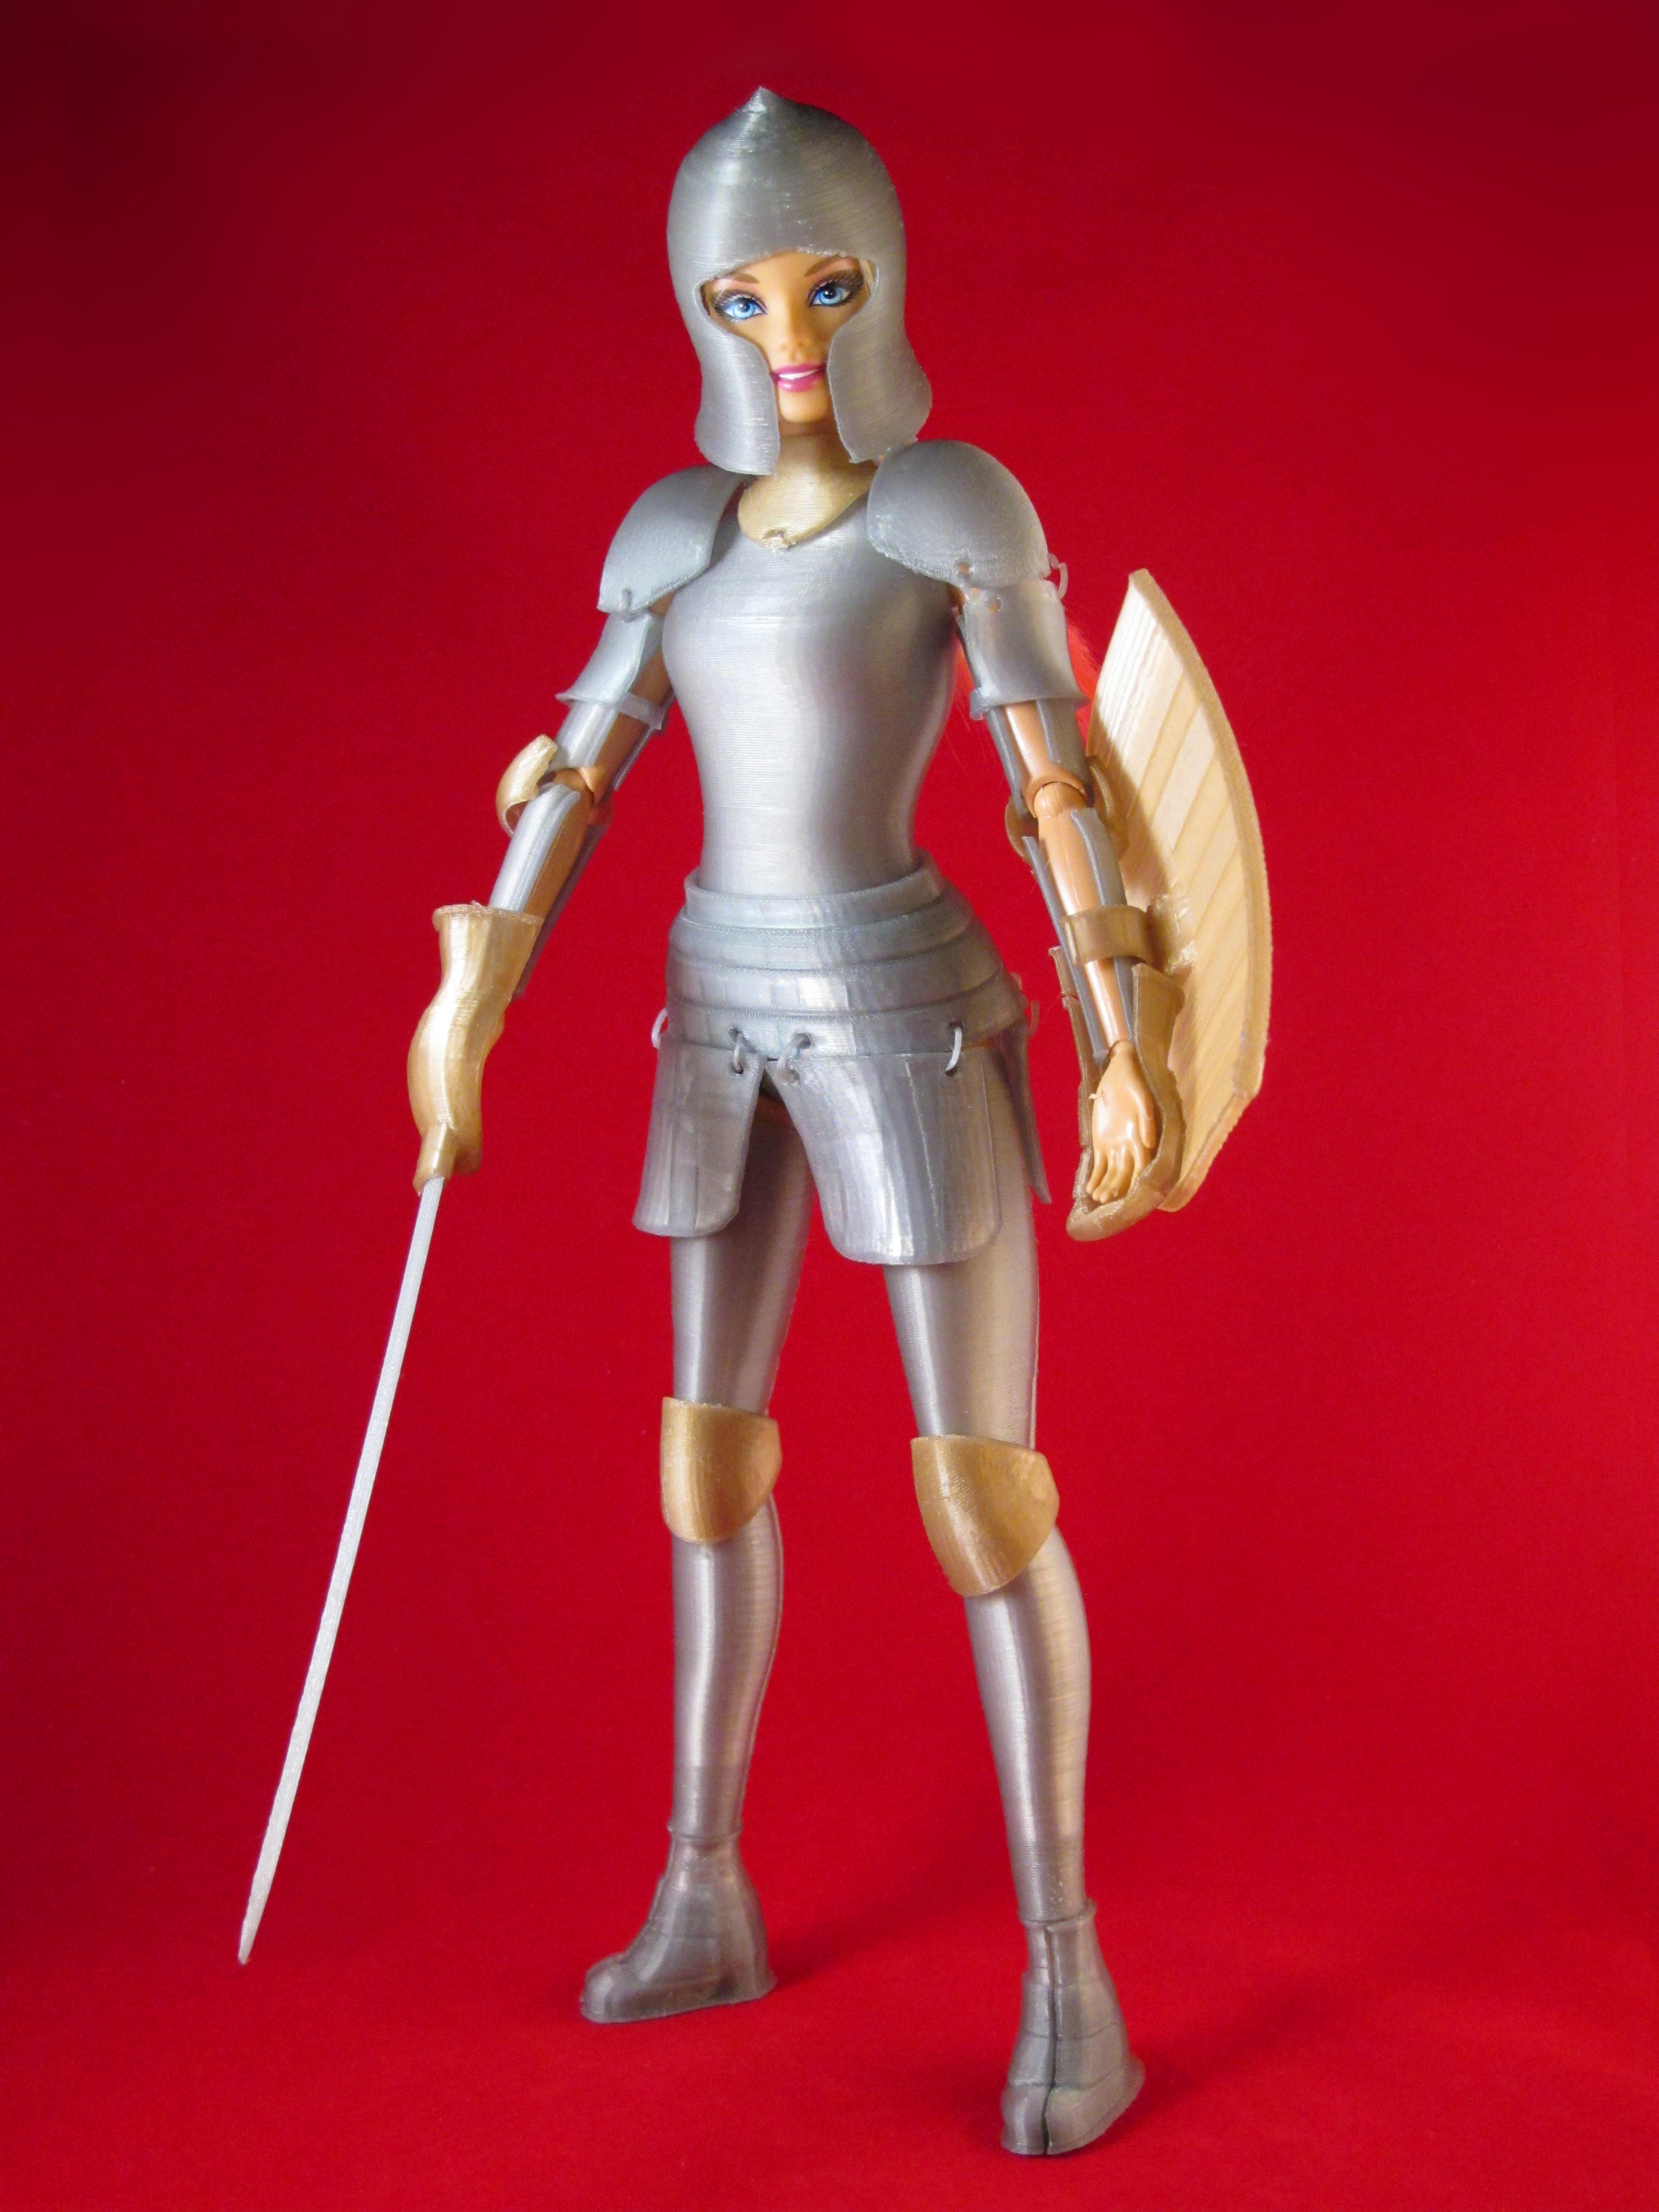 Barbie stands in her silver suit of armor, complete with shield and sword.